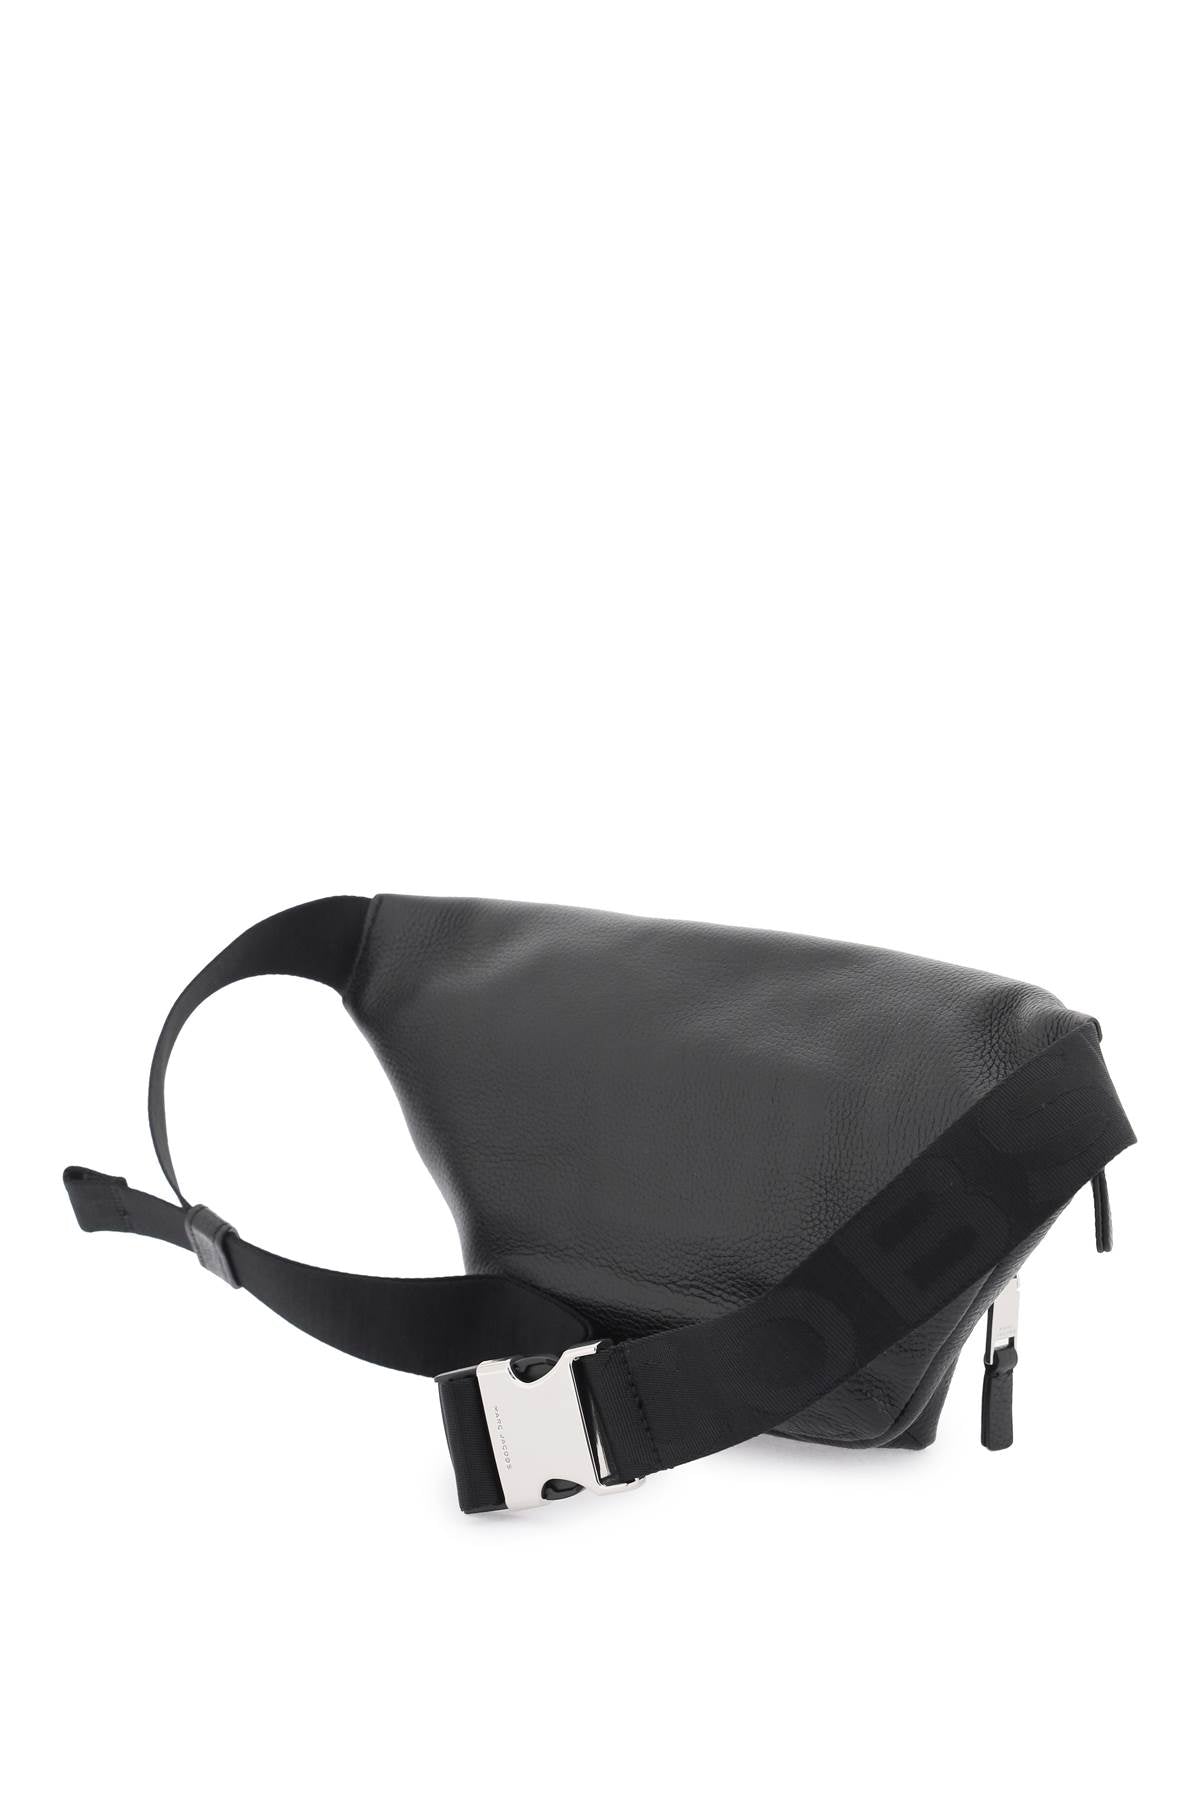 Marc Jacobs Leather Belt Bag: The Perfect   Black